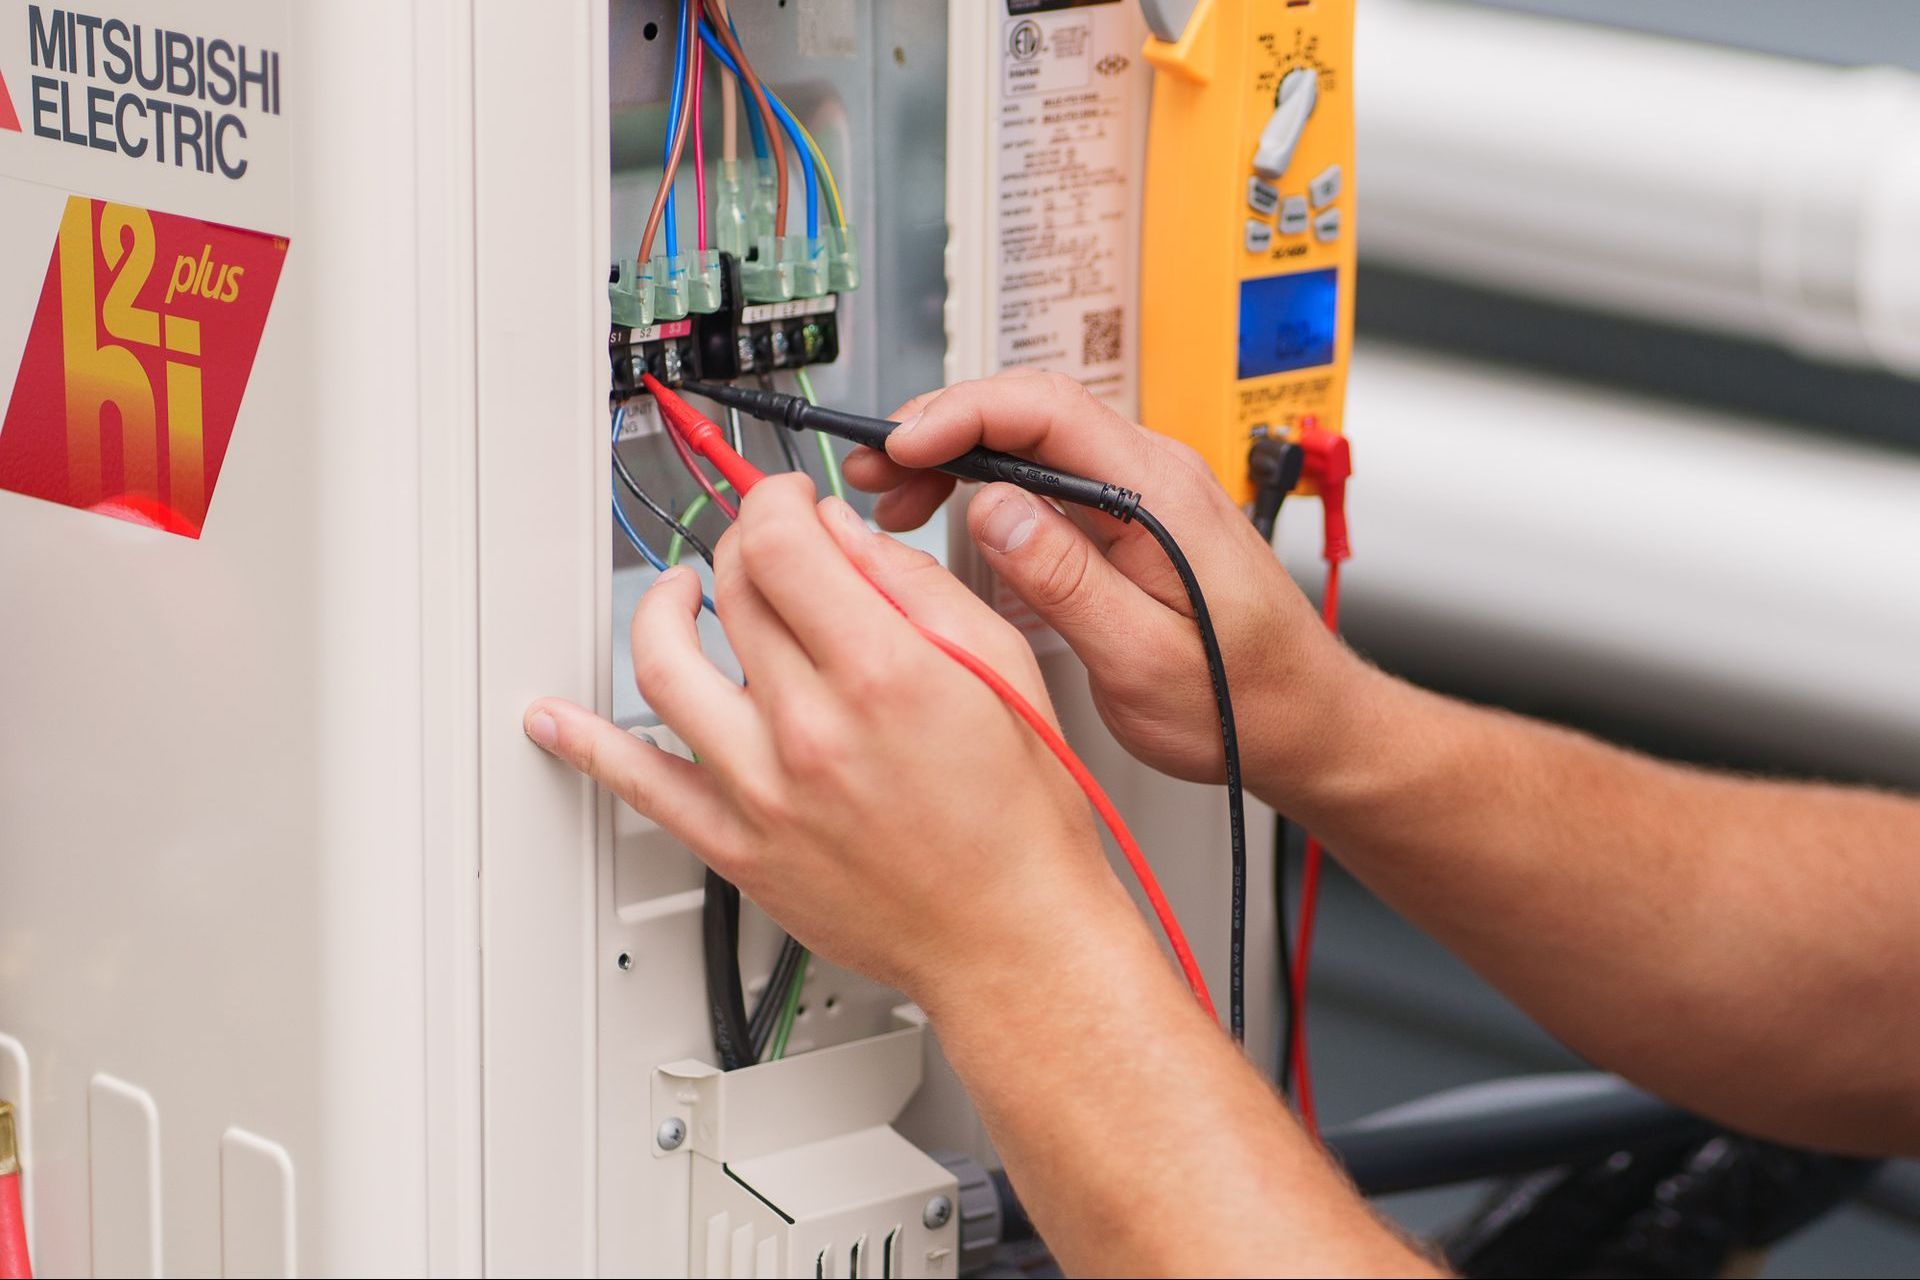 Prevett Heating and Cooling |A person is working on a Mitsubishi electric electrical box.